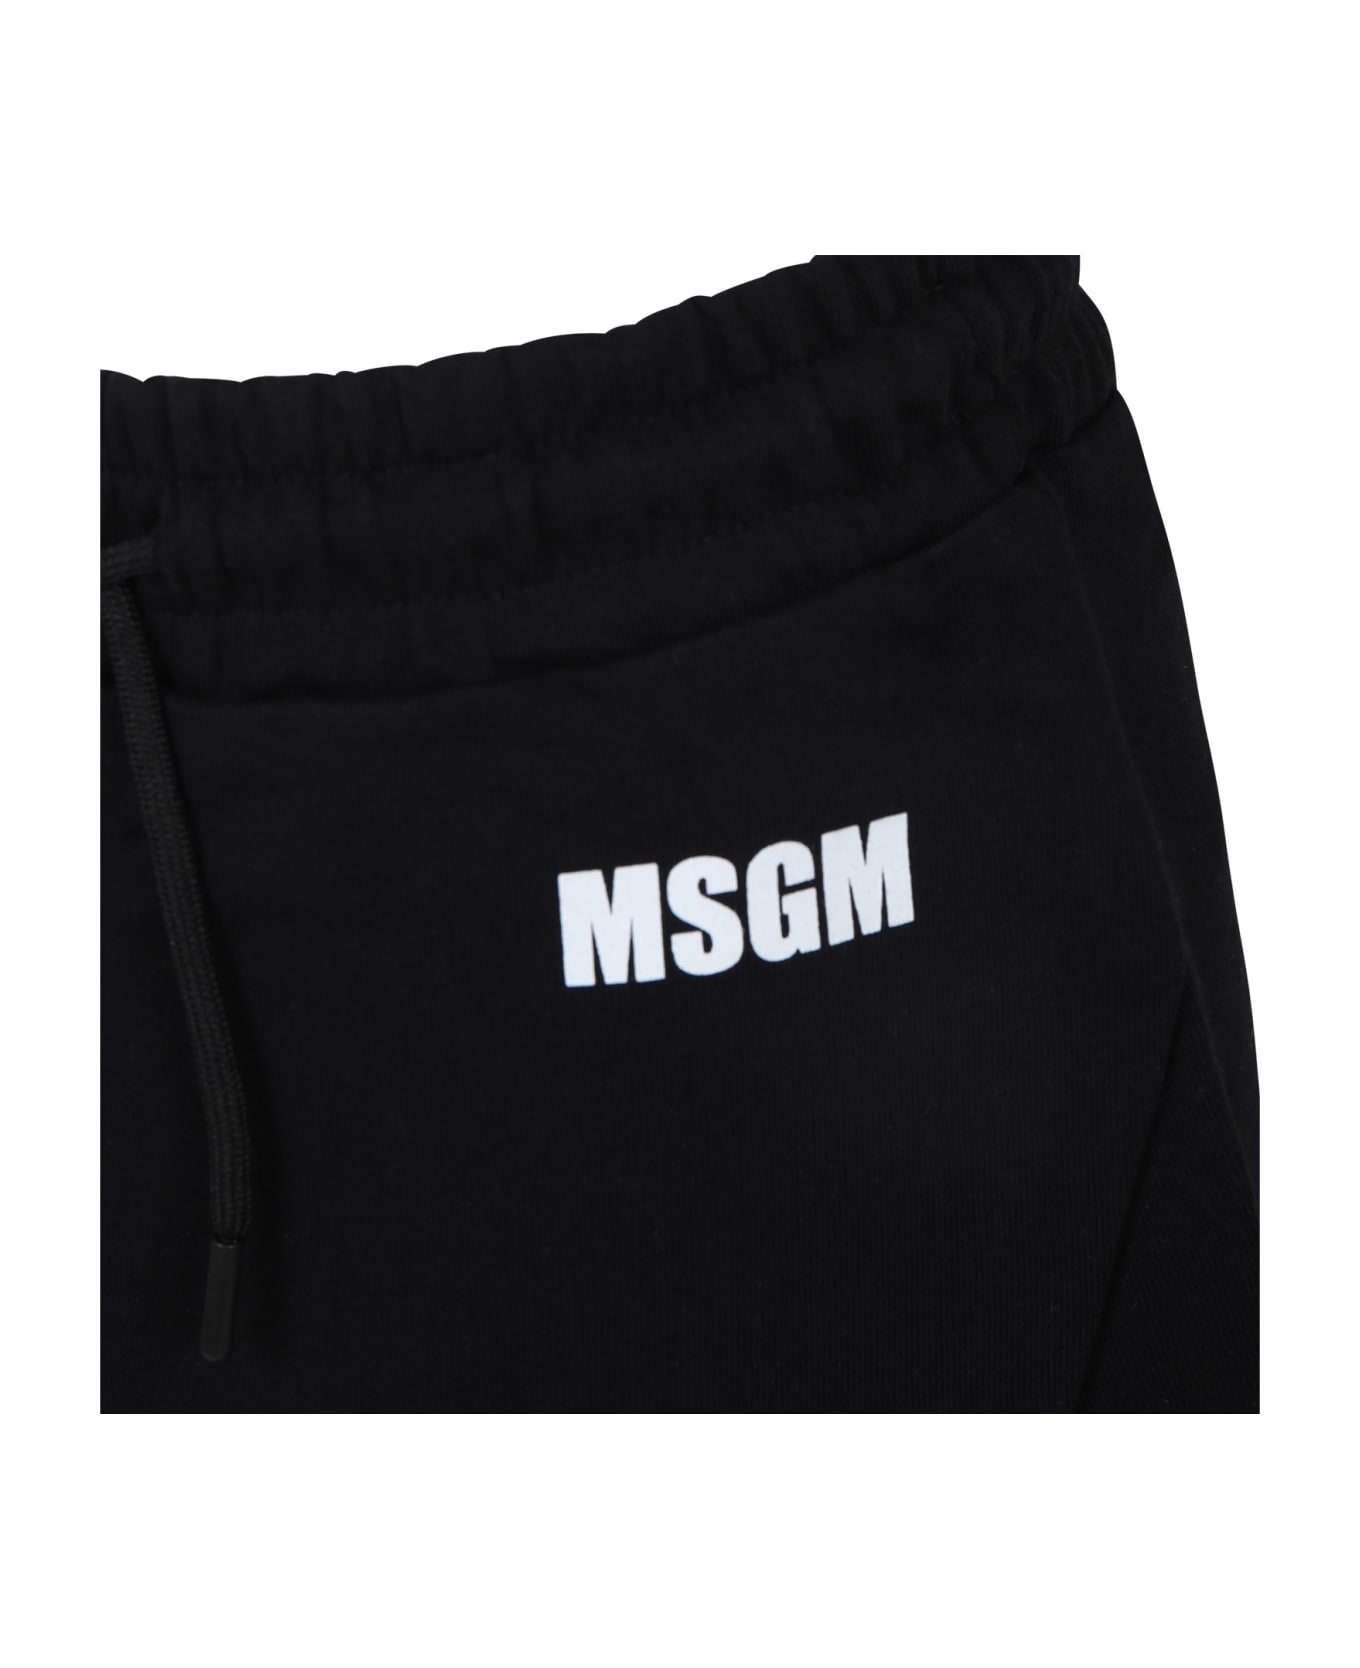 MSGM Black Skirt For Girl With Logo And Writing - Nero